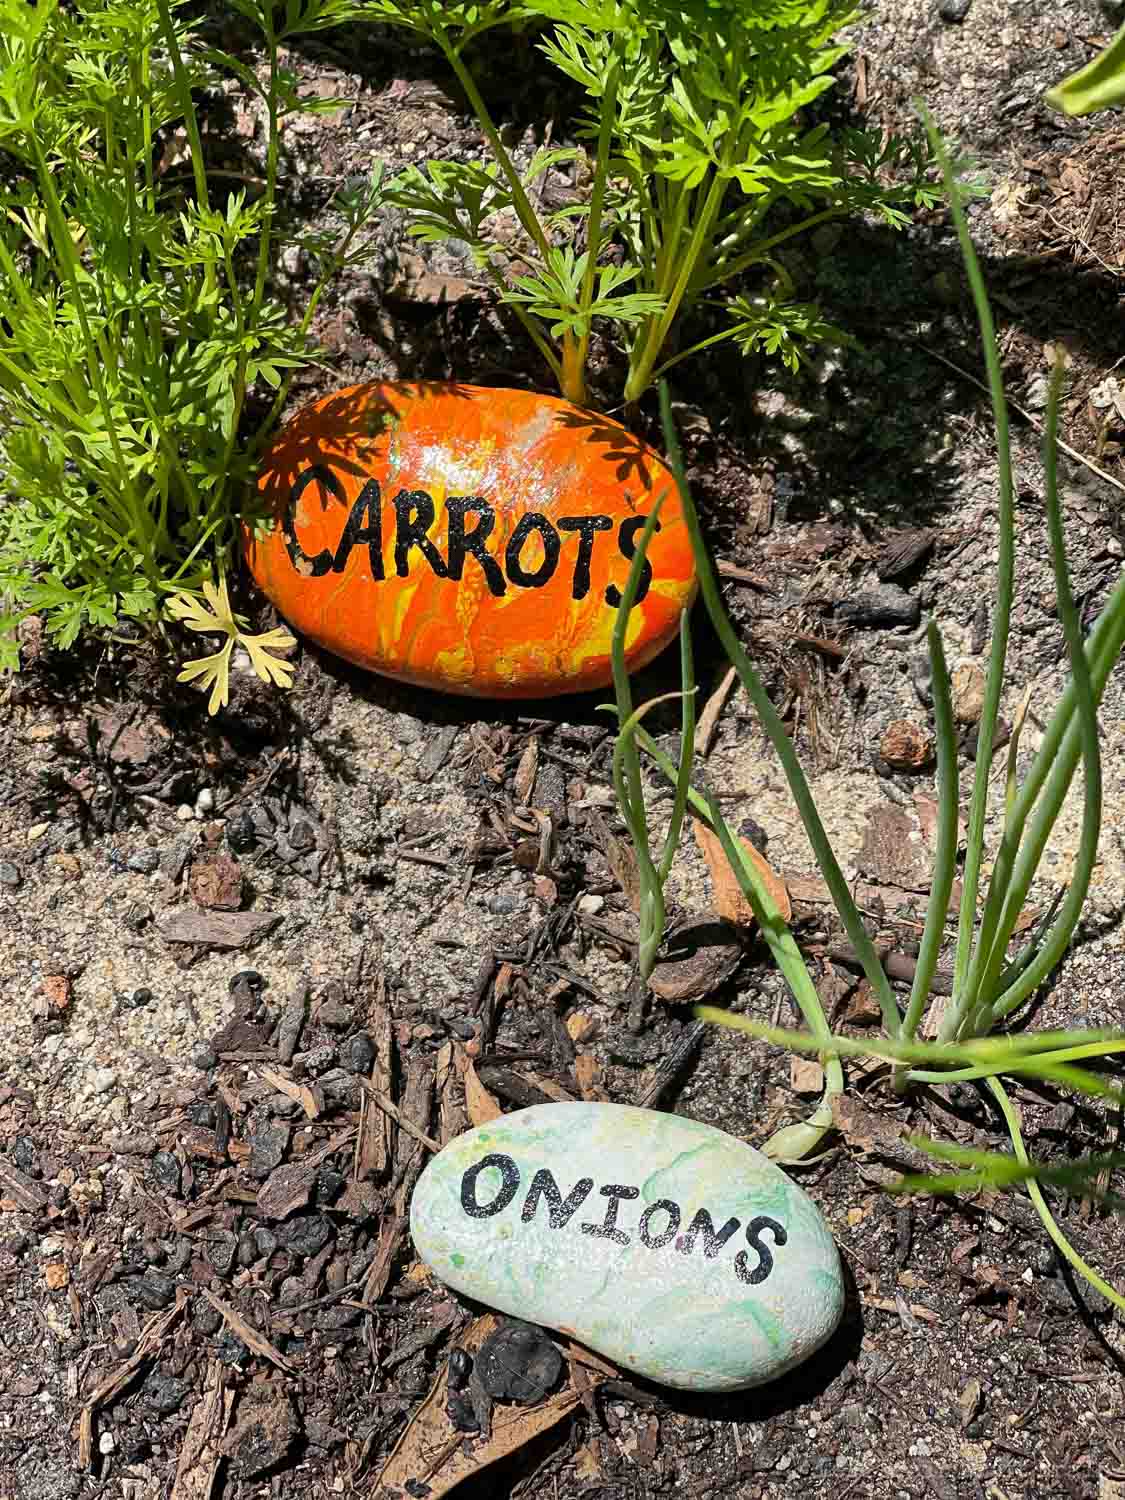 orange and white painted rocks in soil carrots and onions pour painted rock garden markers